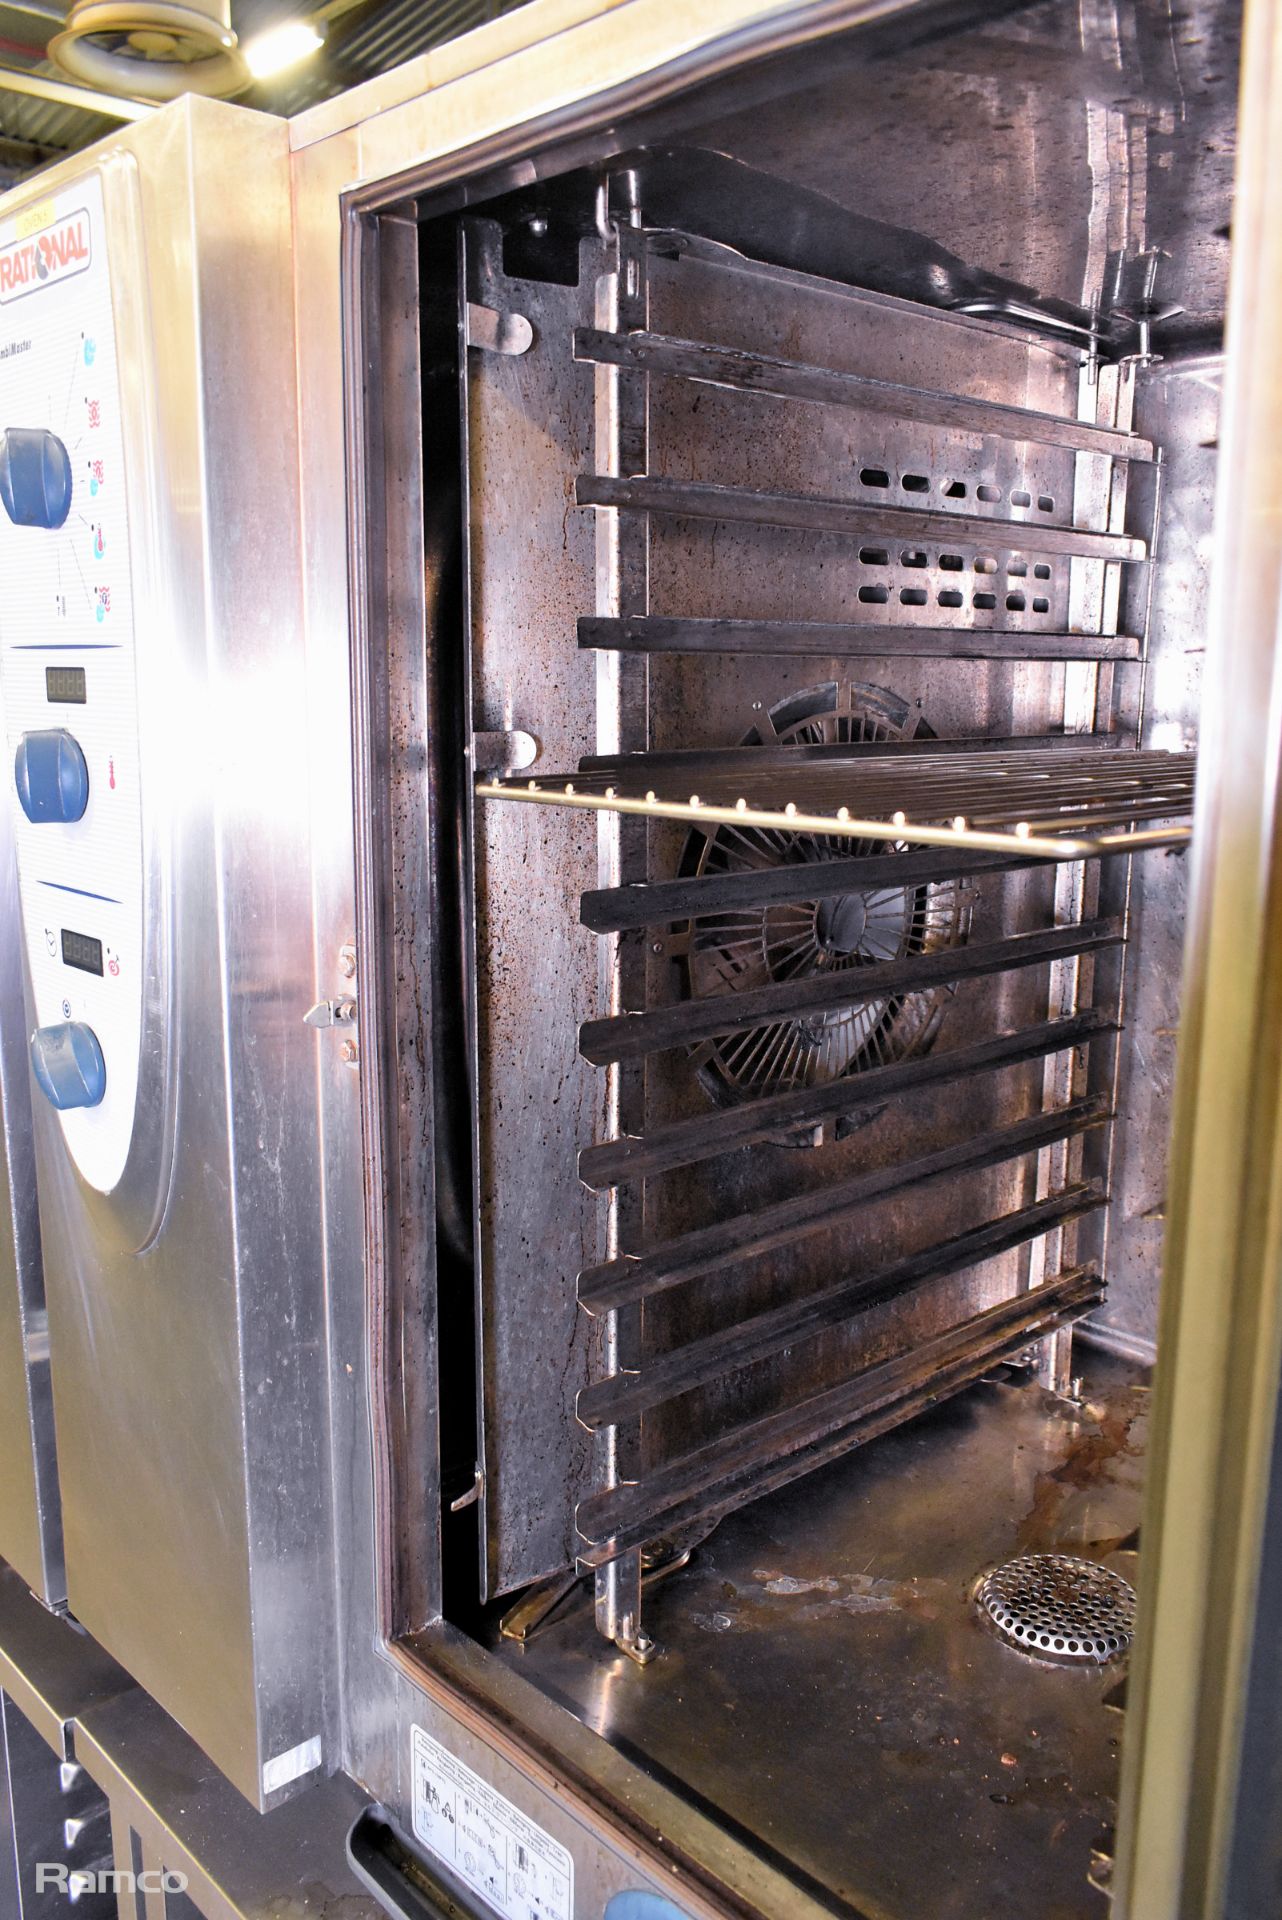 Rational CombiMaster CM 101G stainless steel 10 grid combi oven on stainless steel stand - Image 6 of 10